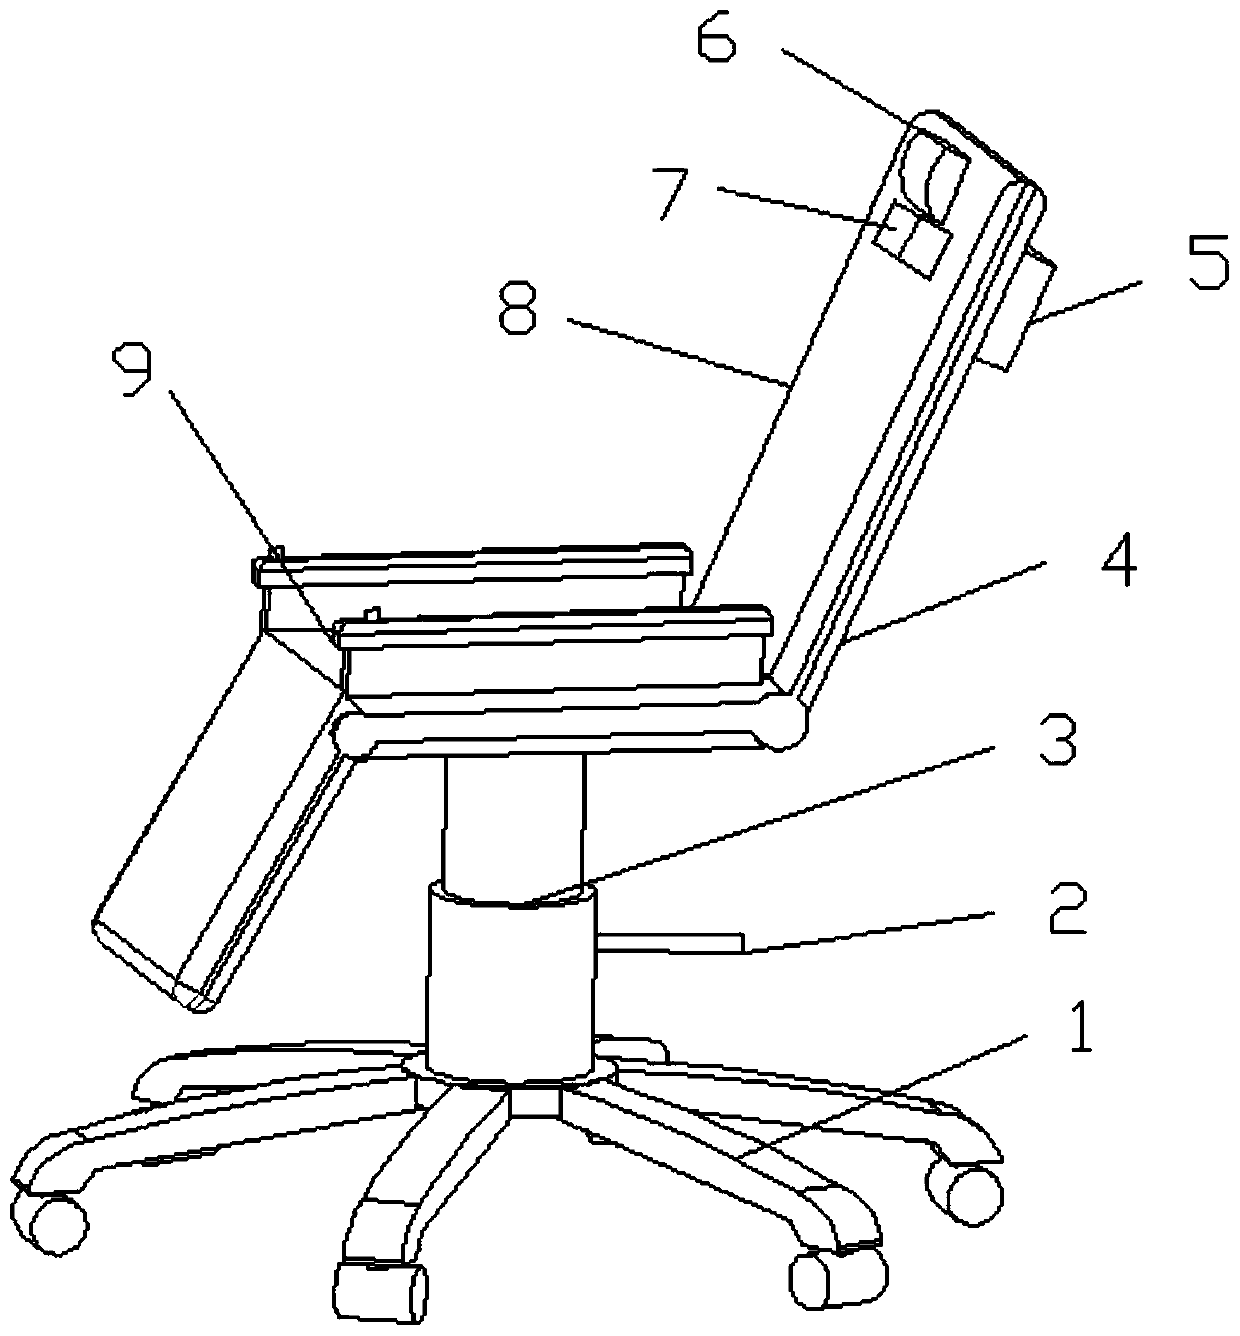 Adjustable health care office chair